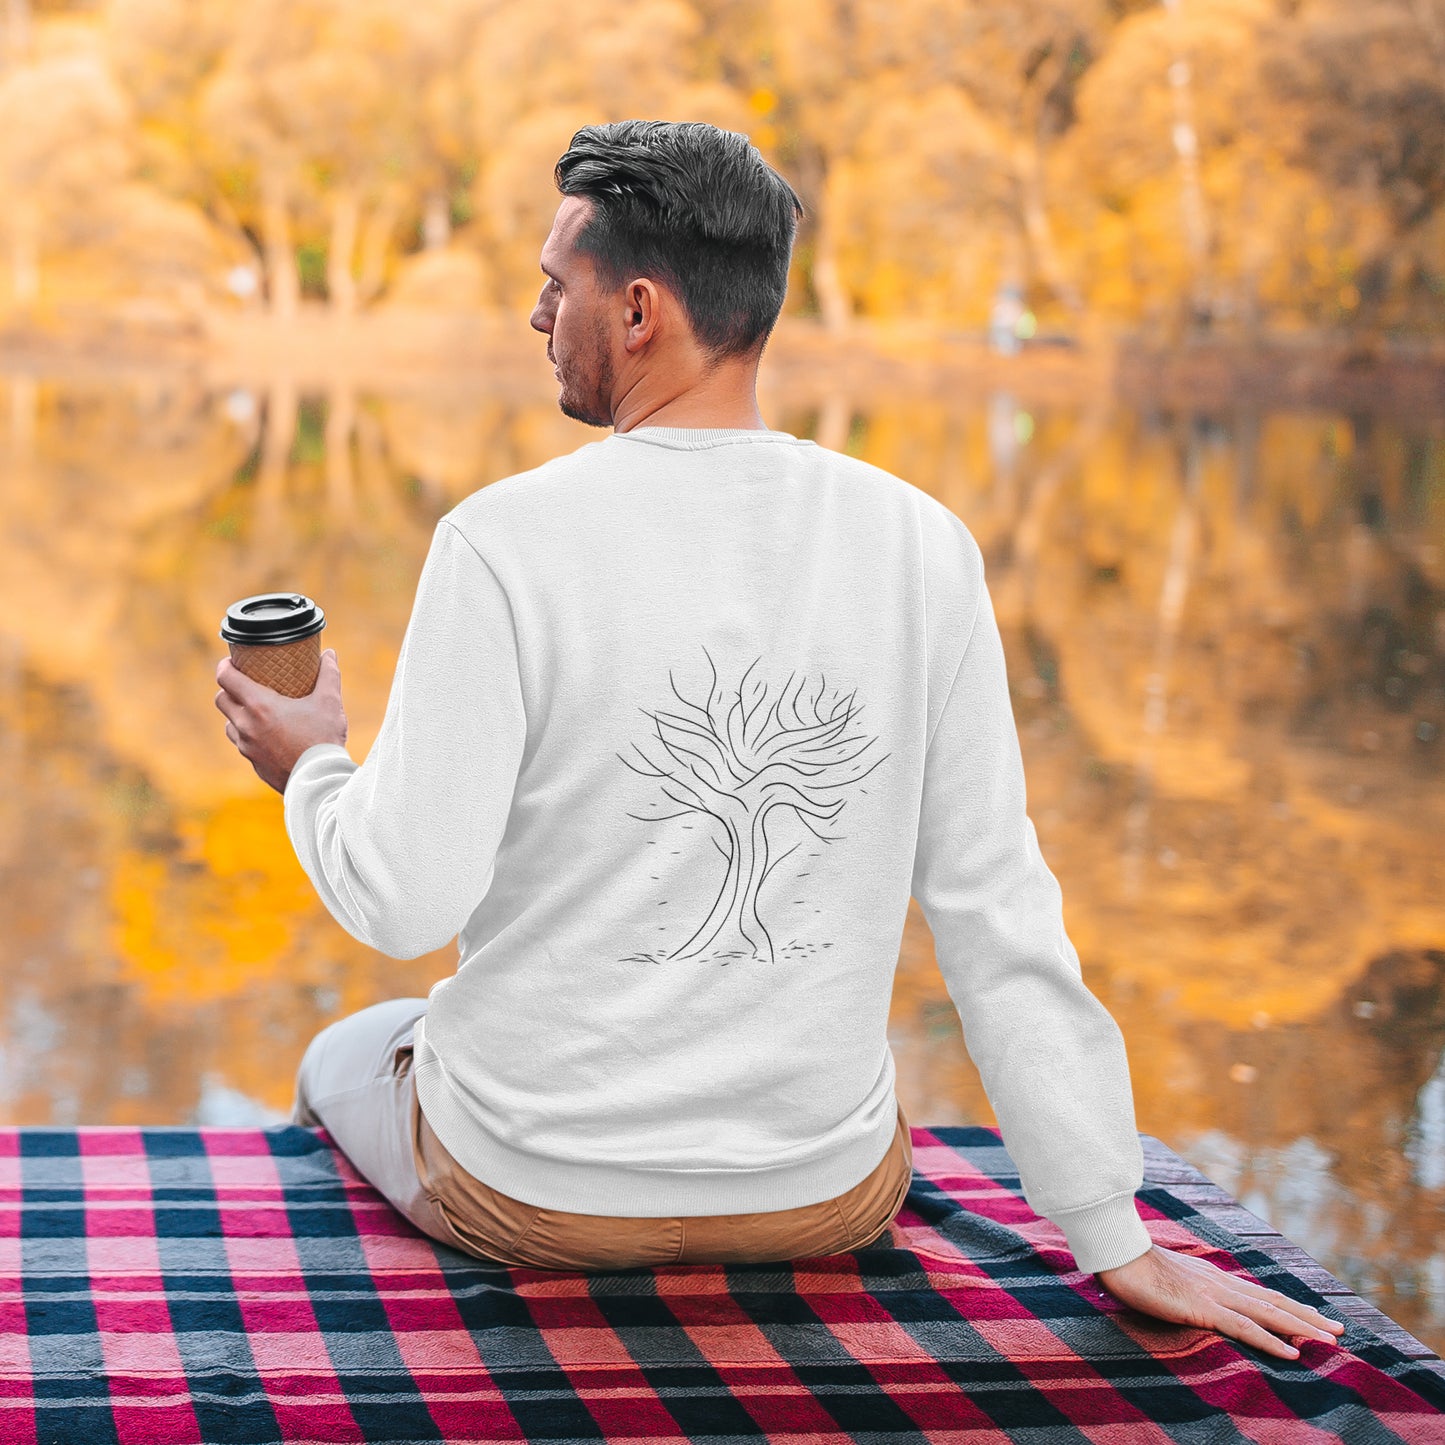 Autumn Tree Trance | Vegan Jumper worn by a man looking over a lake